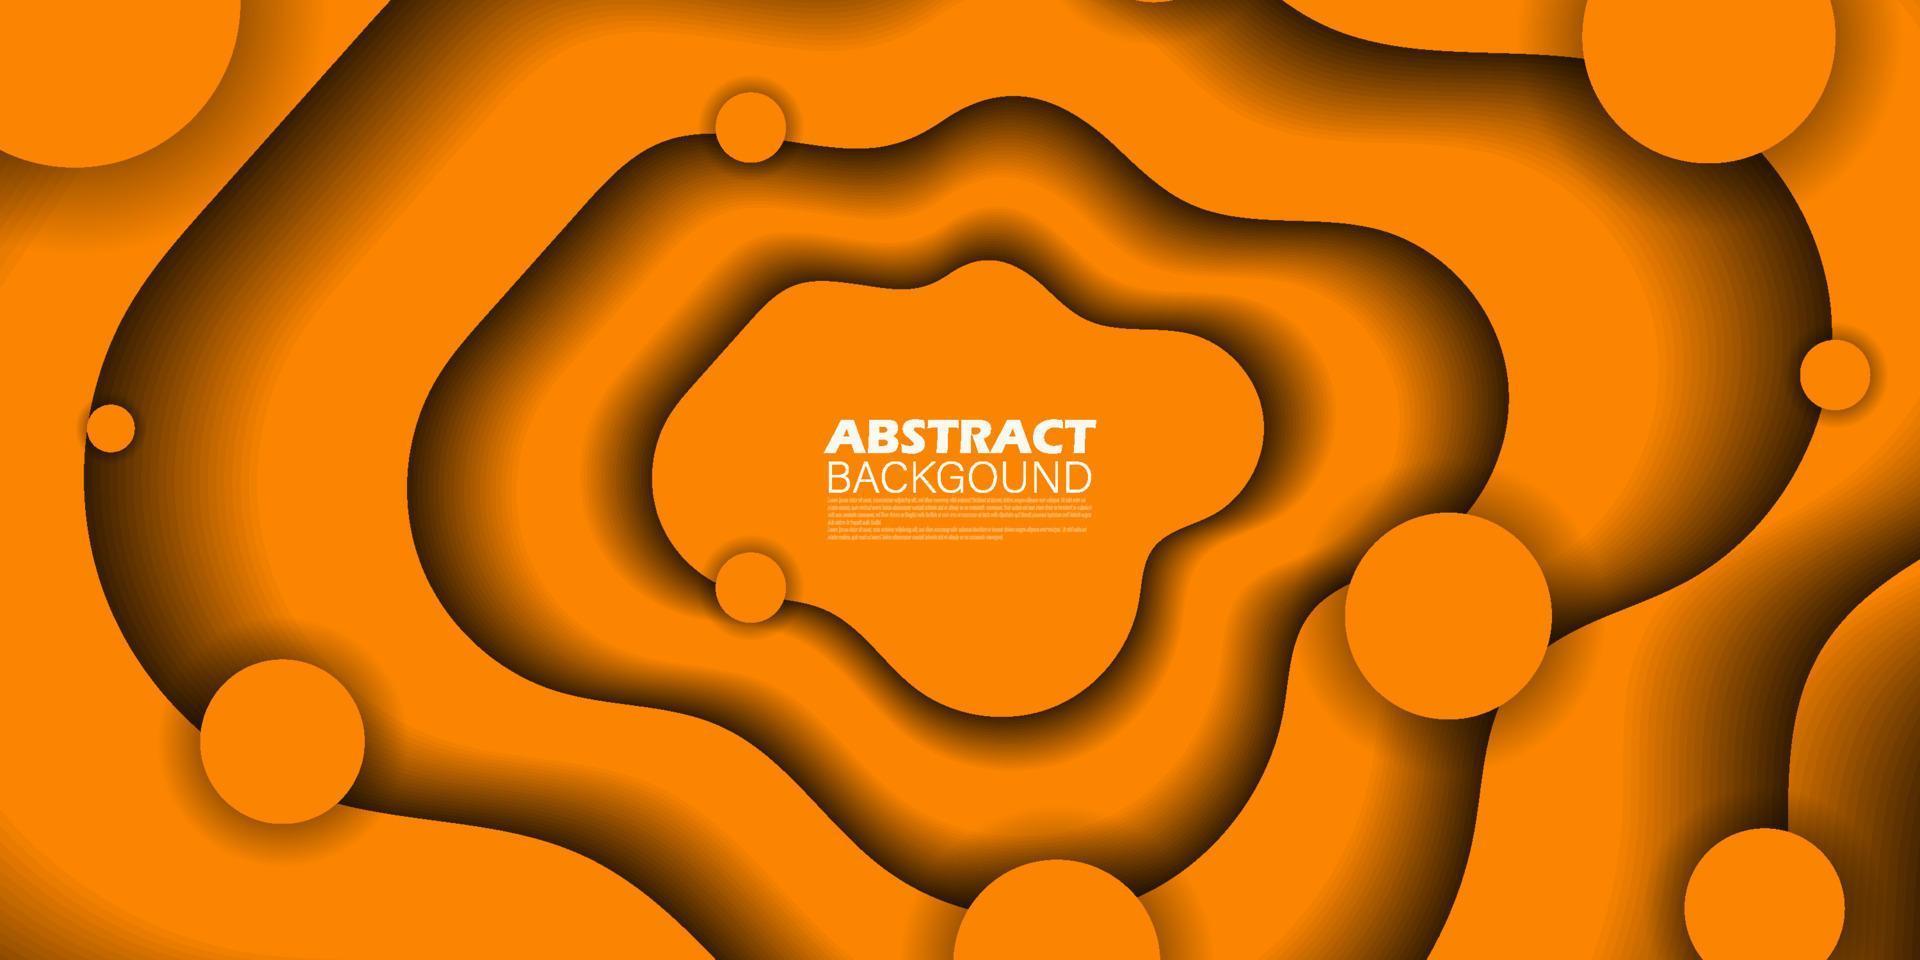 Trendy papercut orange abstract background with curves in realistic 3d papercut craft art style. Modern business presentation illustration or creative project template.Eps10 vector